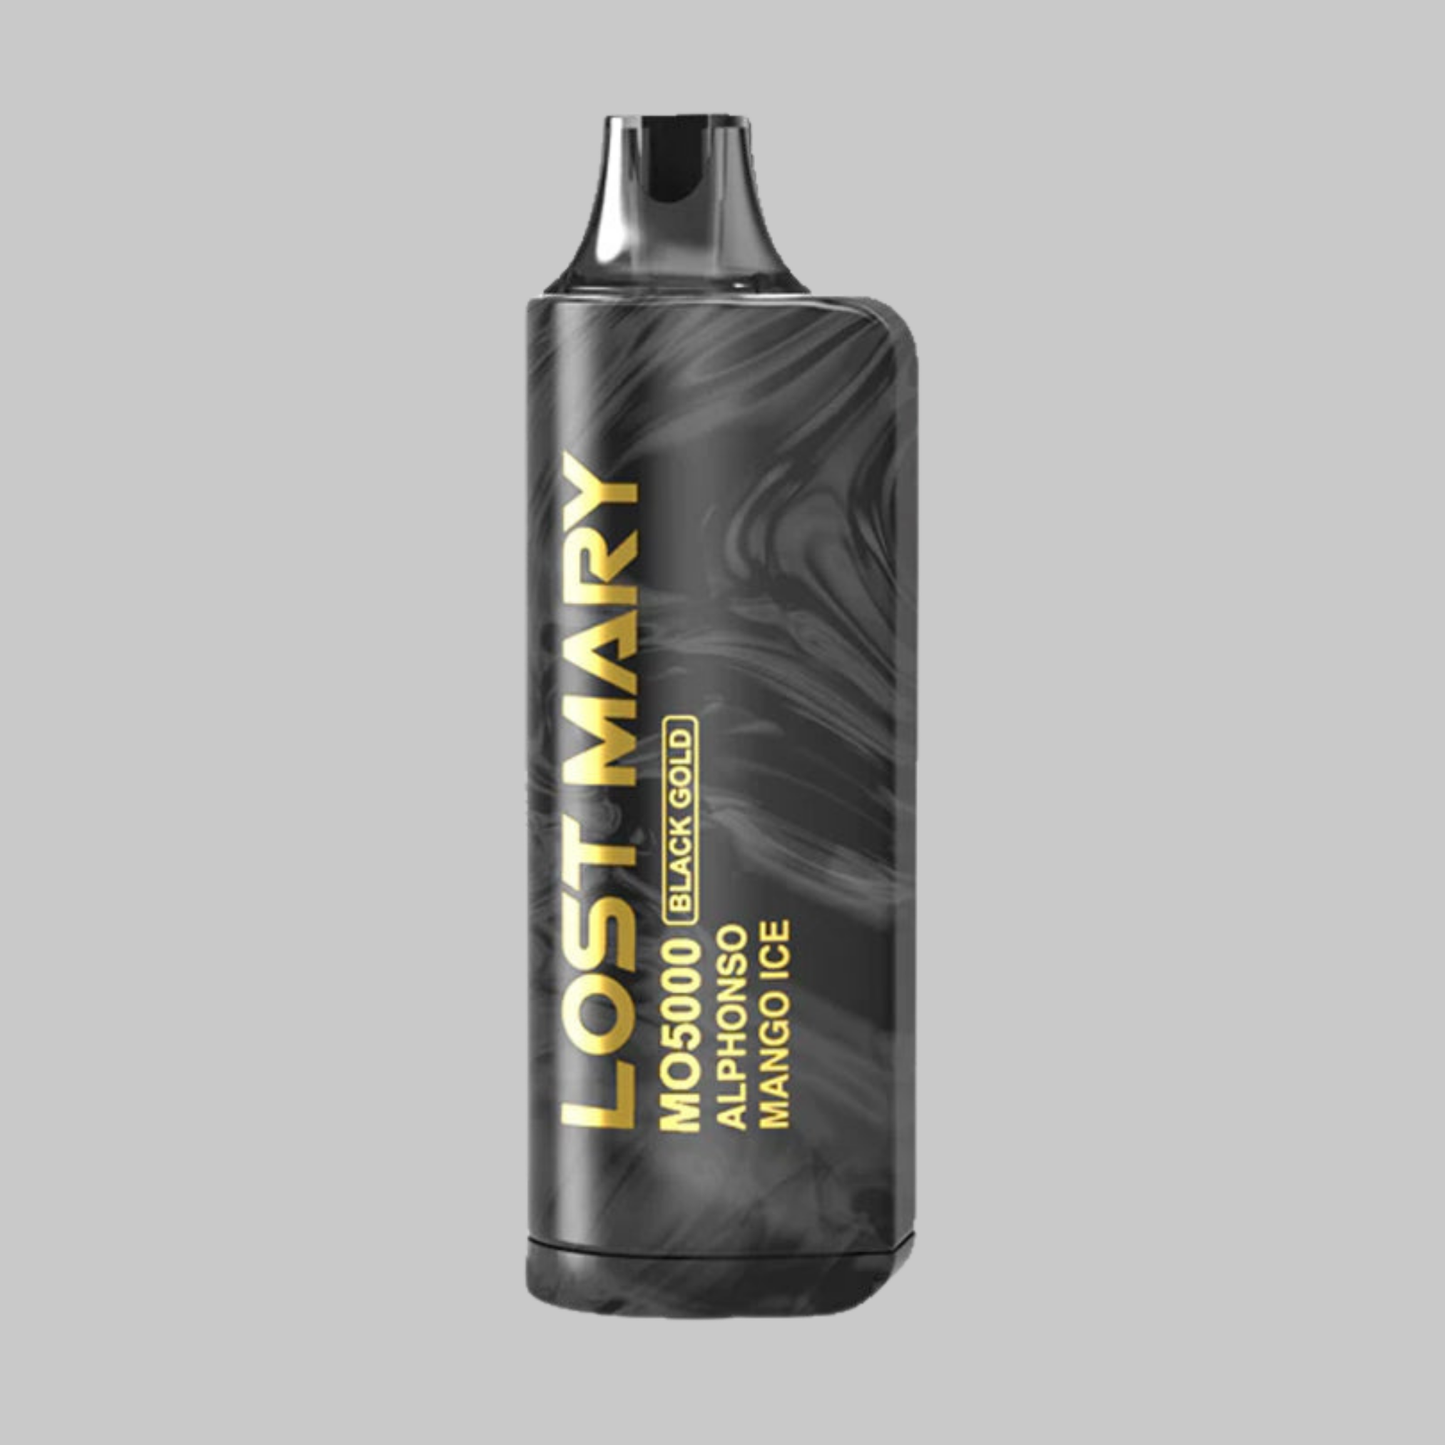 [Limited Edition] LOSTMARY MO 5000 ALPHONSO MANGO ICE Flavor BLACK Gold Edition